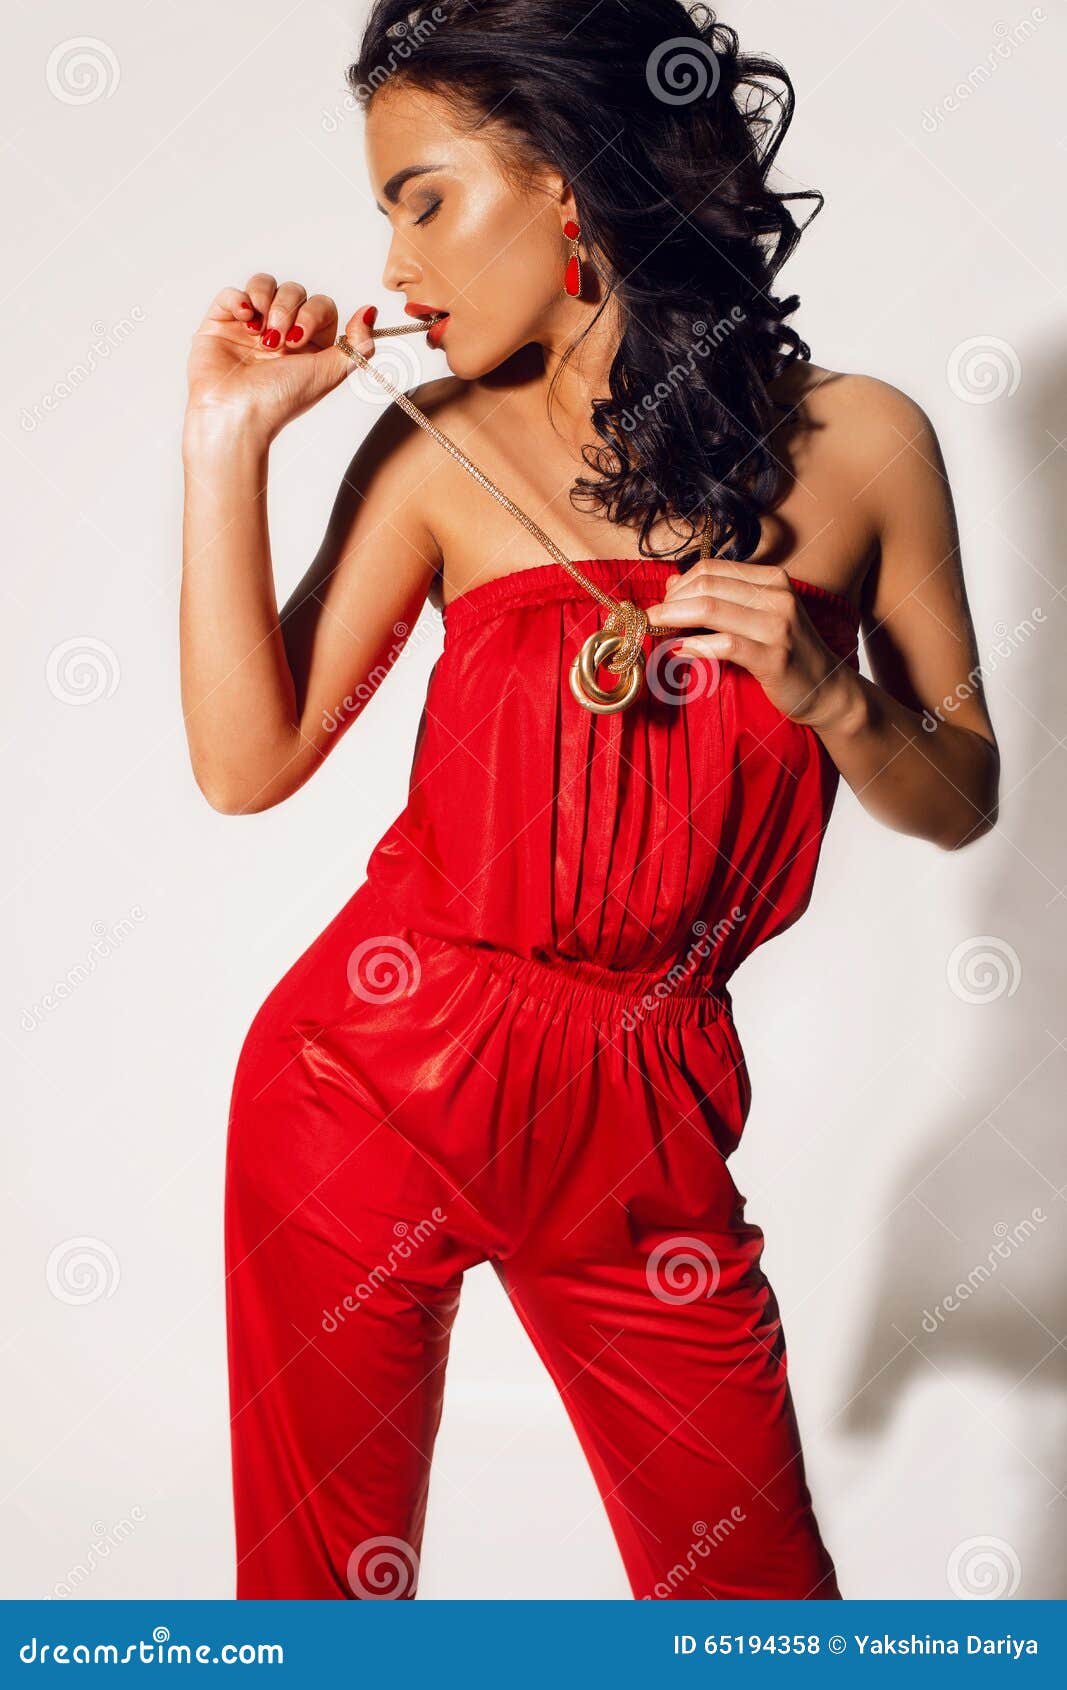 Tanned Woman With Long Dark Curly Hair Wears Elegant Red Suit With